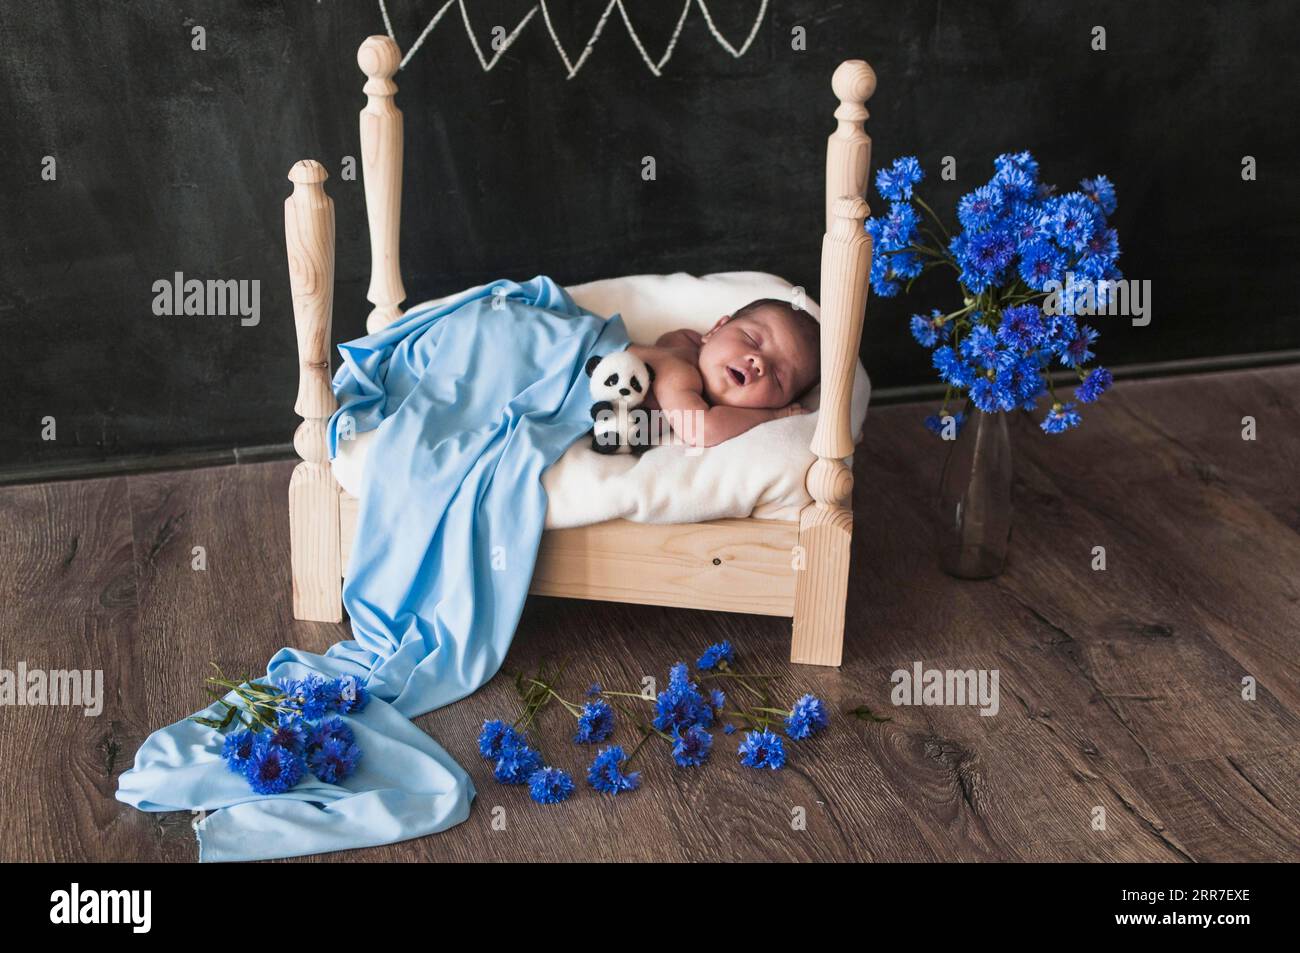 Adorable baby small bed Stock Photo